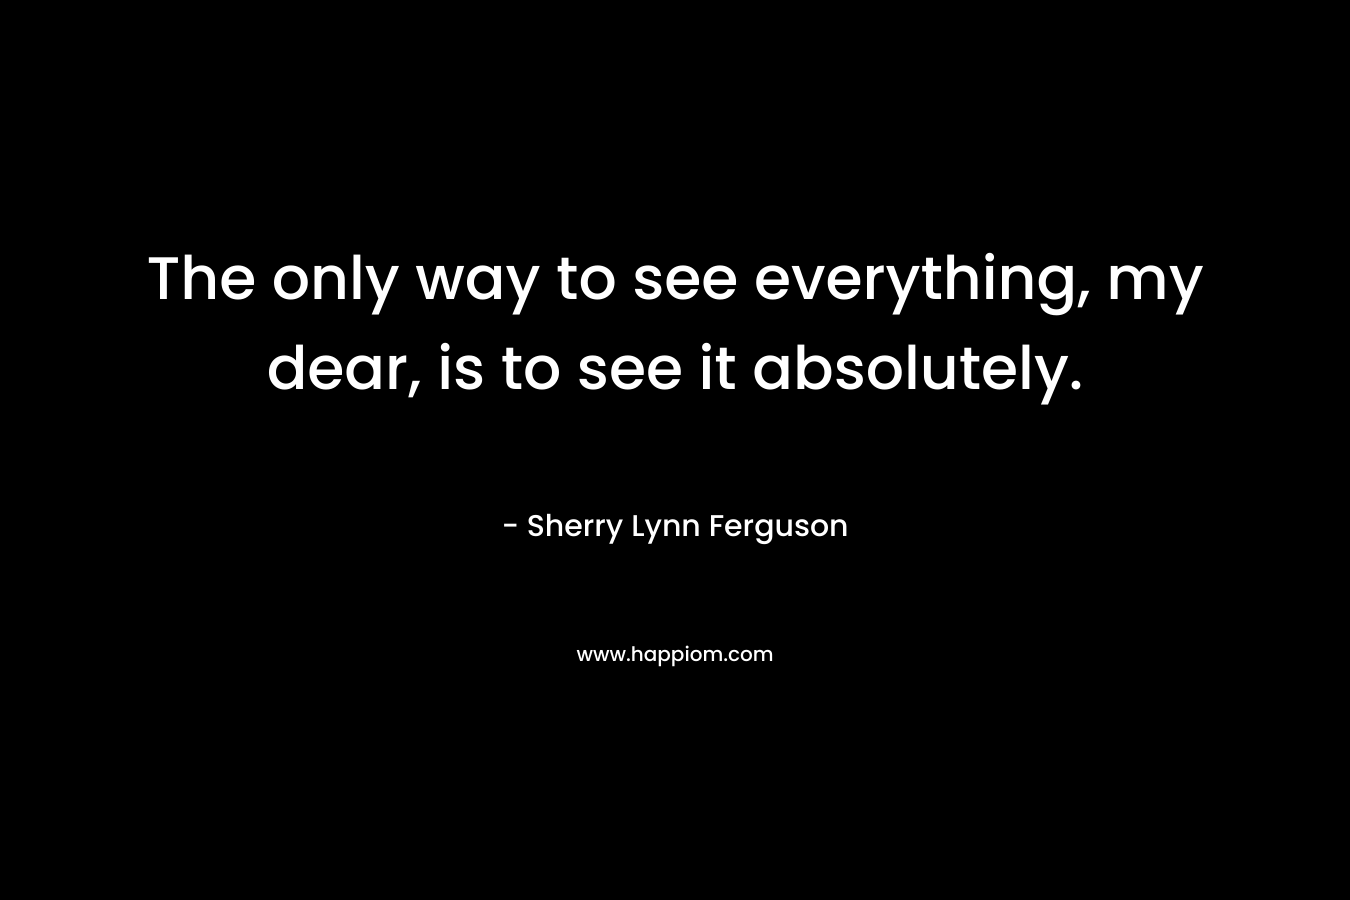 The only way to see everything, my dear, is to see it absolutely. – Sherry Lynn Ferguson